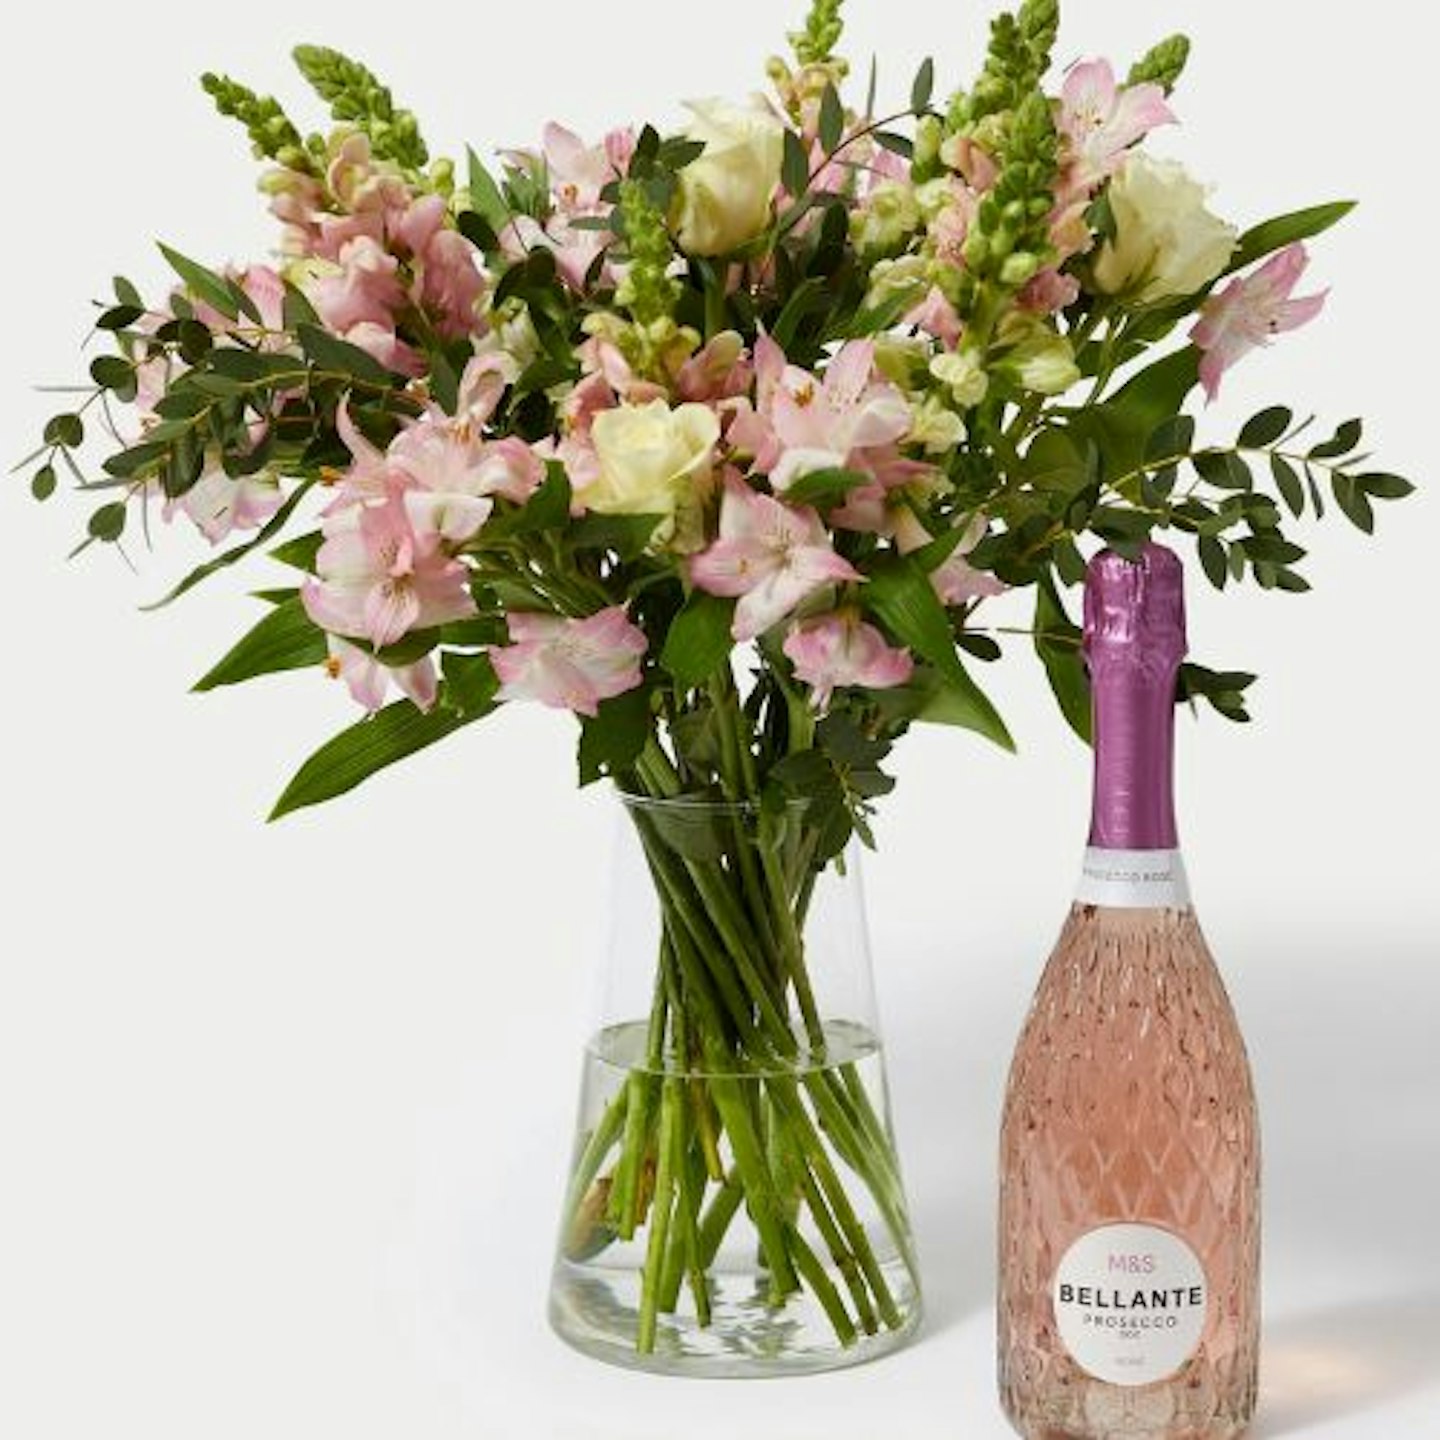 Marks & Spencer Lovely Mum Rose & Alstroemeria Bouquet With Rosé Prosecco